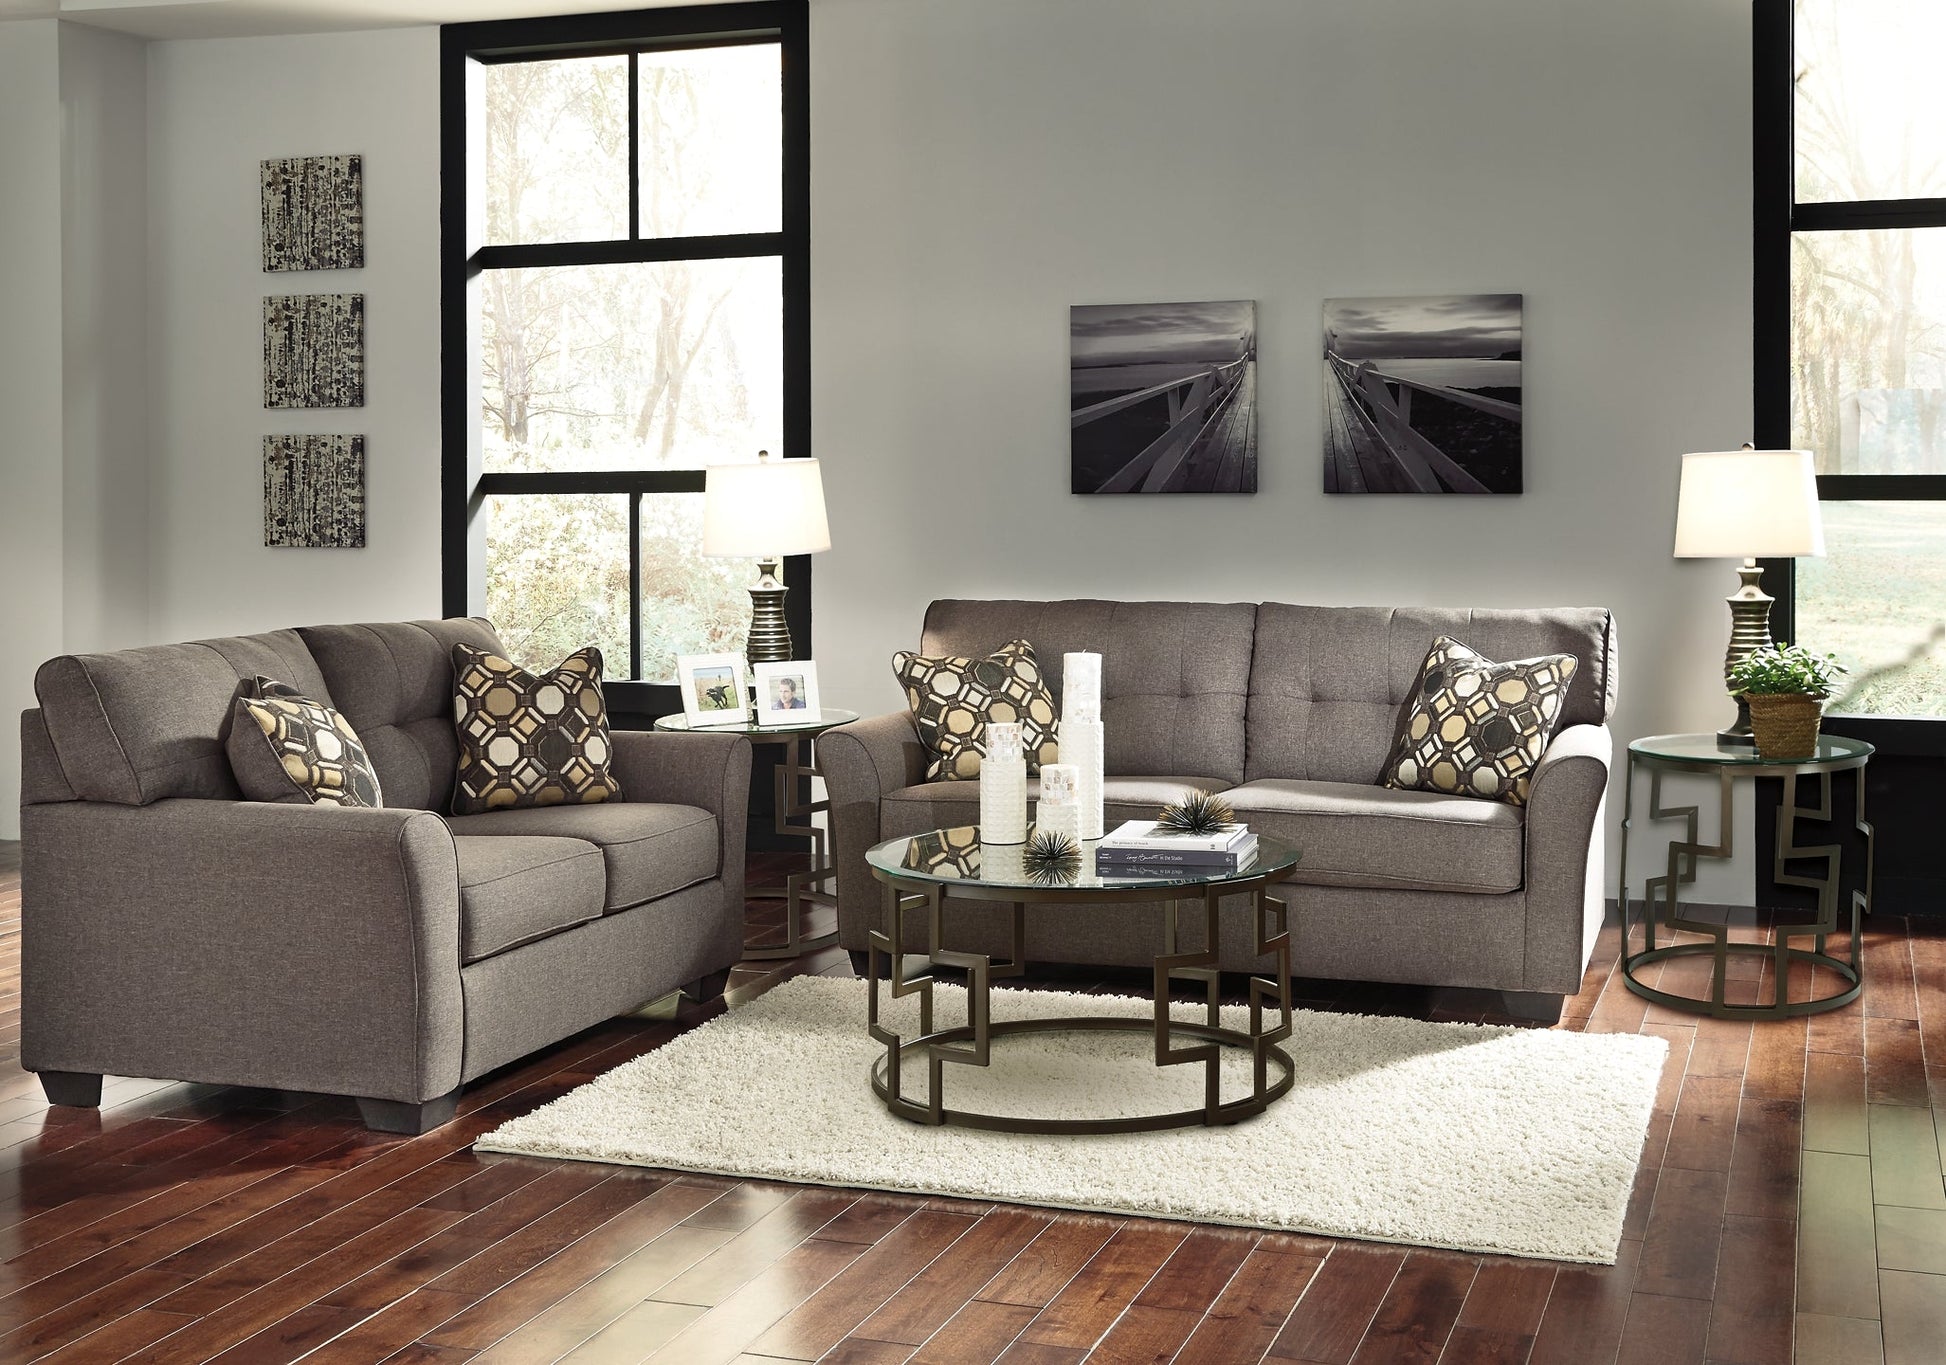 Tibbee Sofa at Walker Mattress and Furniture Locations in Cedar Park and Belton TX.